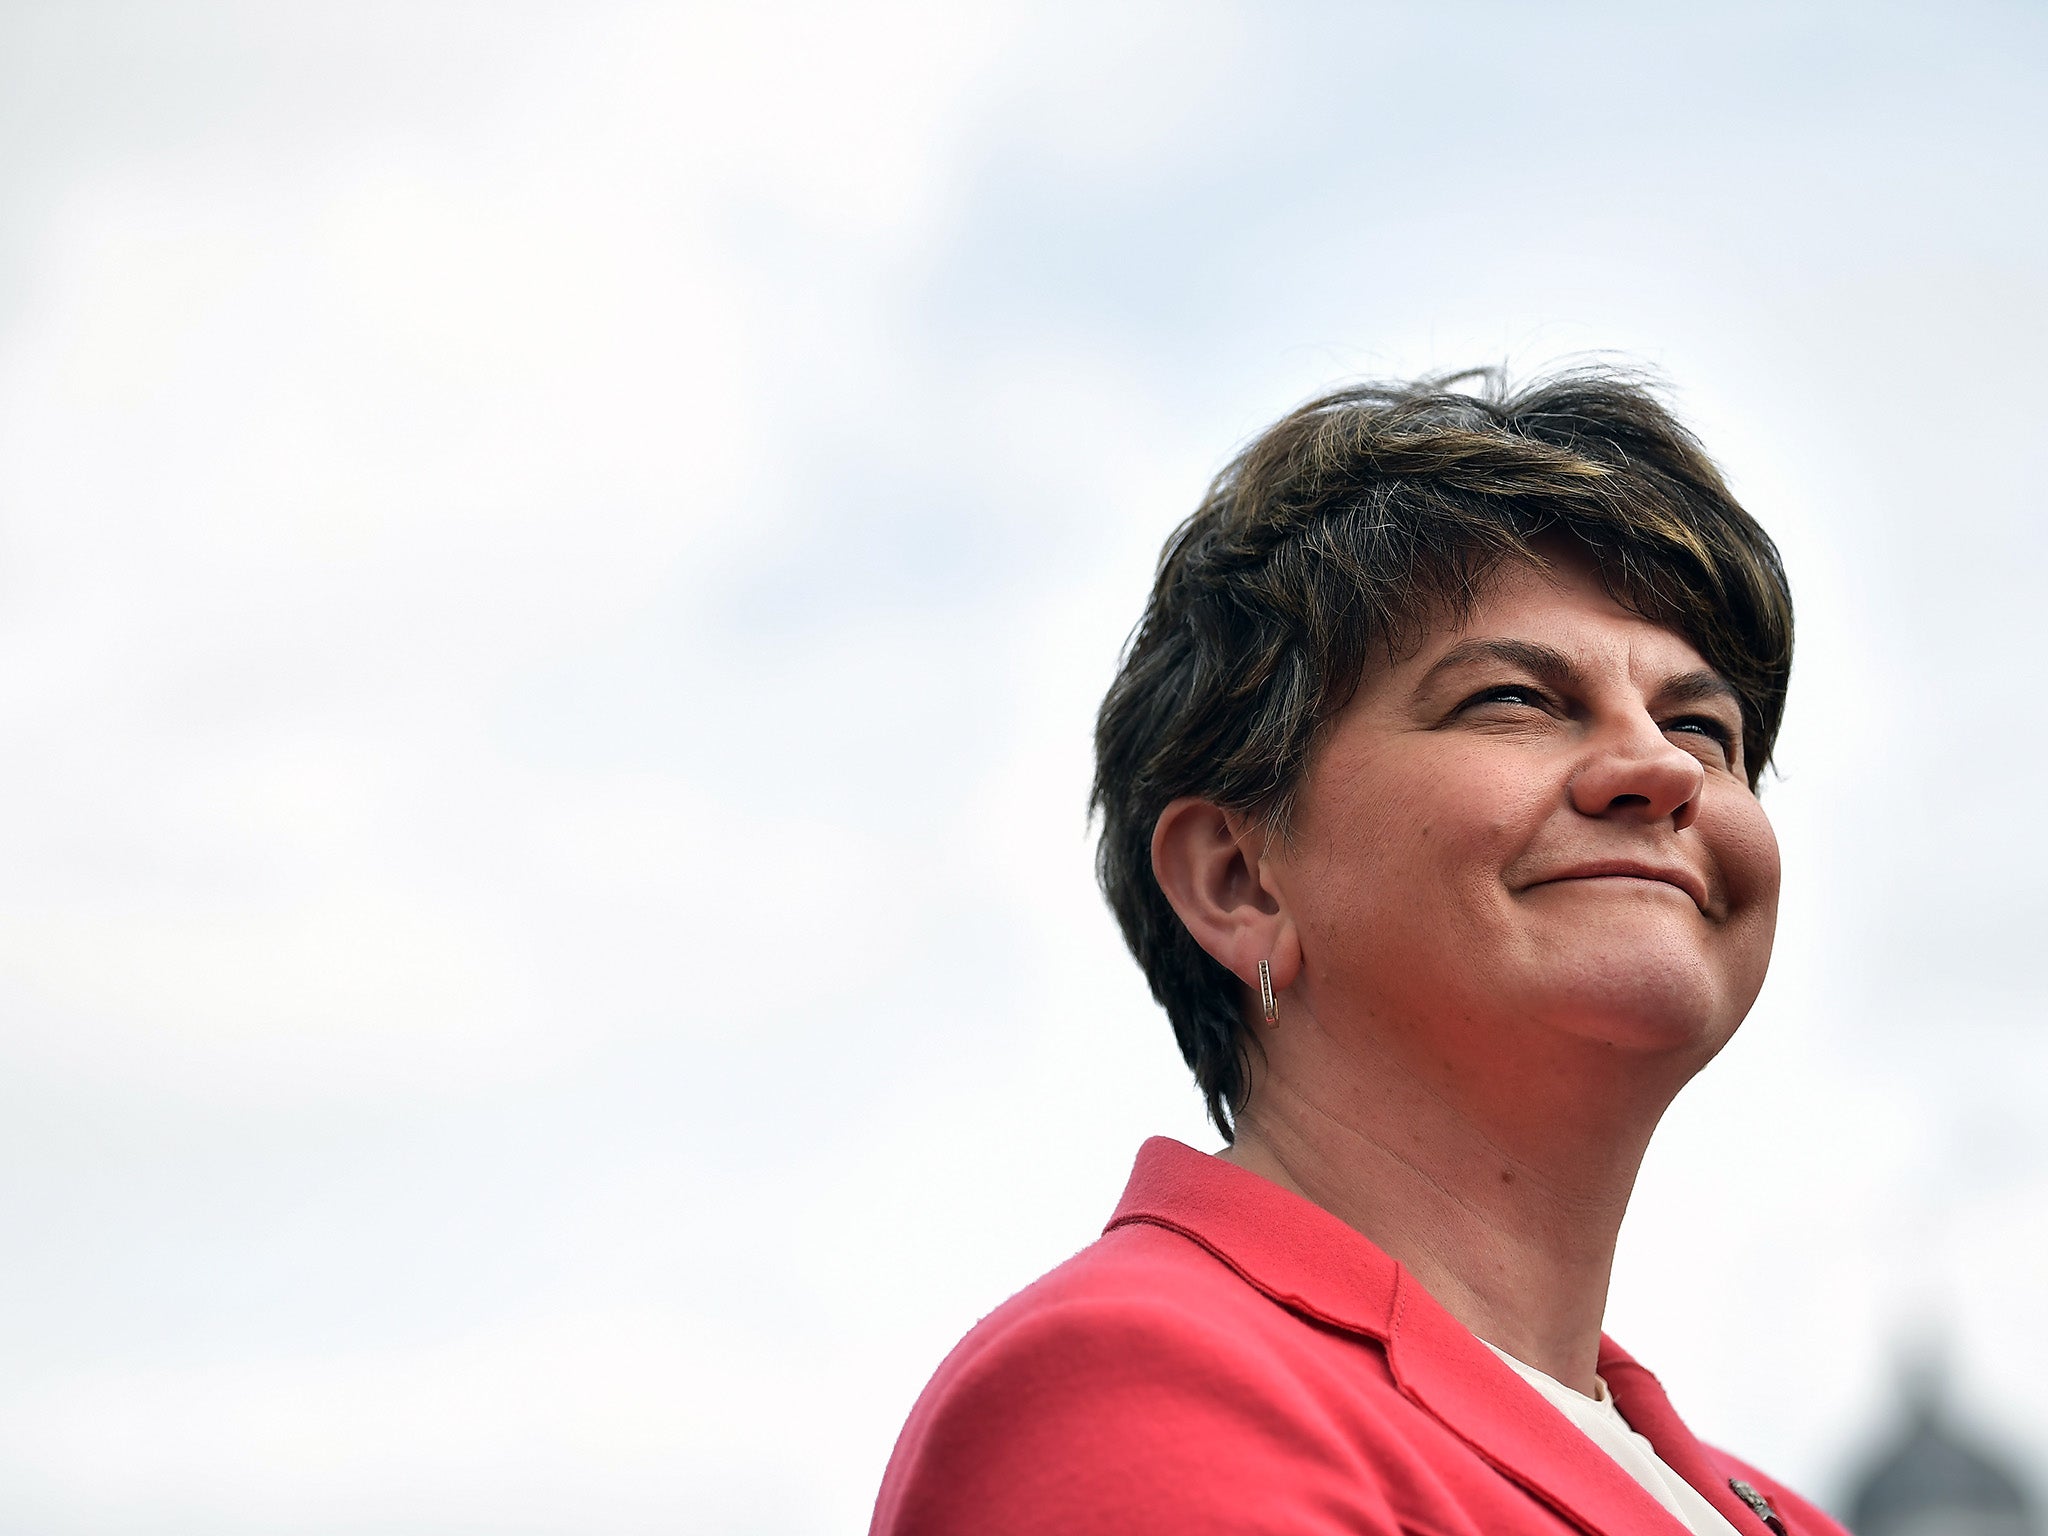 There has been much speculation about the DUP's conservative policies